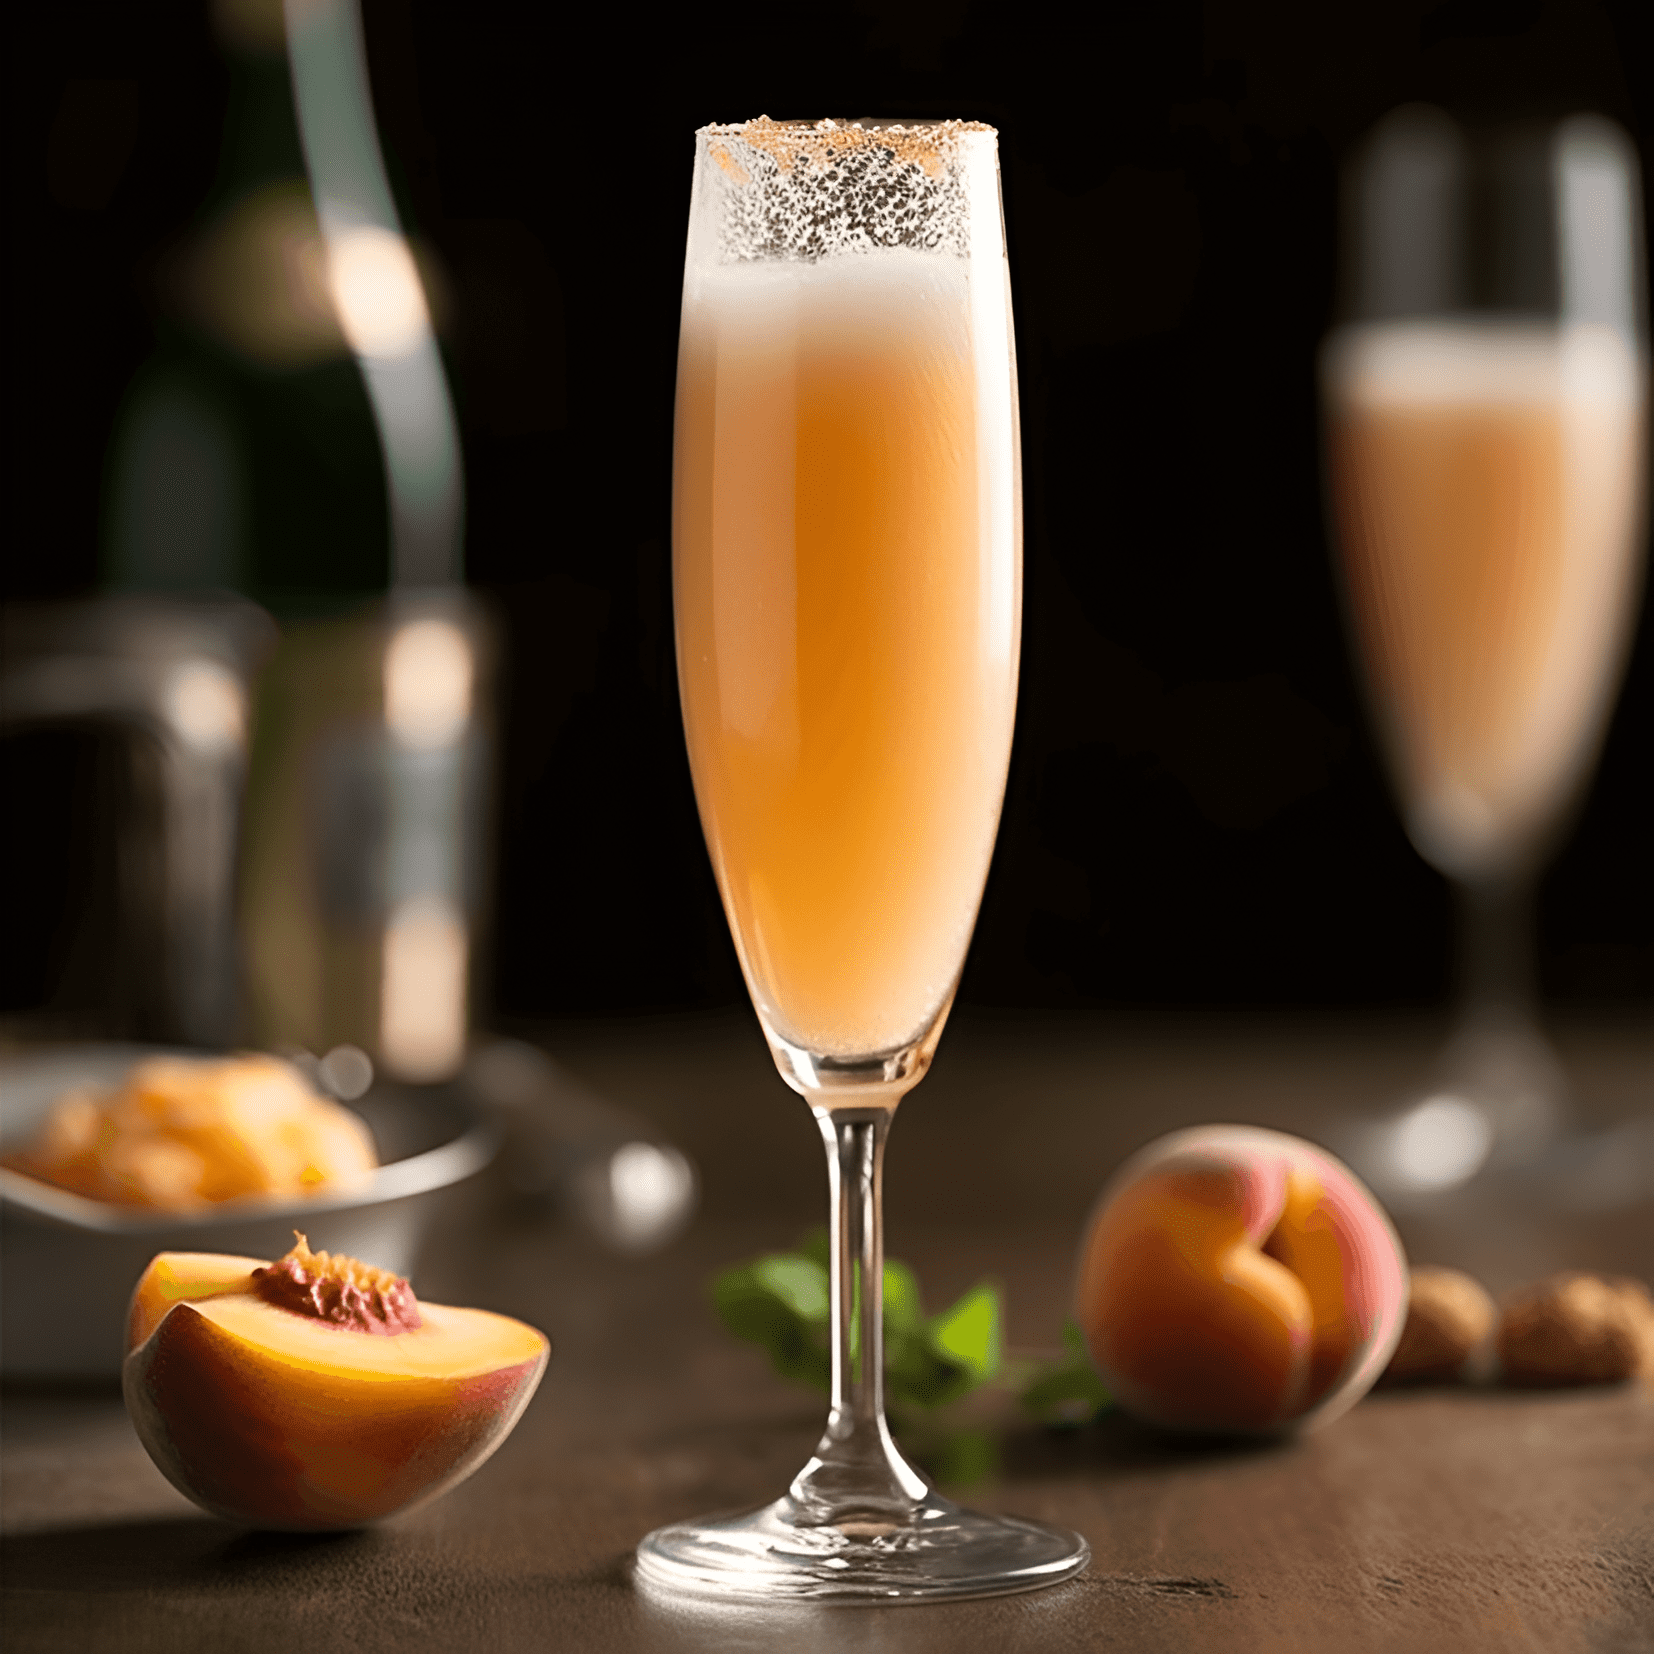 Peach Bellini Cocktail Recipe - The Peach Bellini has a refreshing, fruity, and slightly sweet taste. The combination of peach puree and Prosecco creates a light, bubbly, and smooth texture.